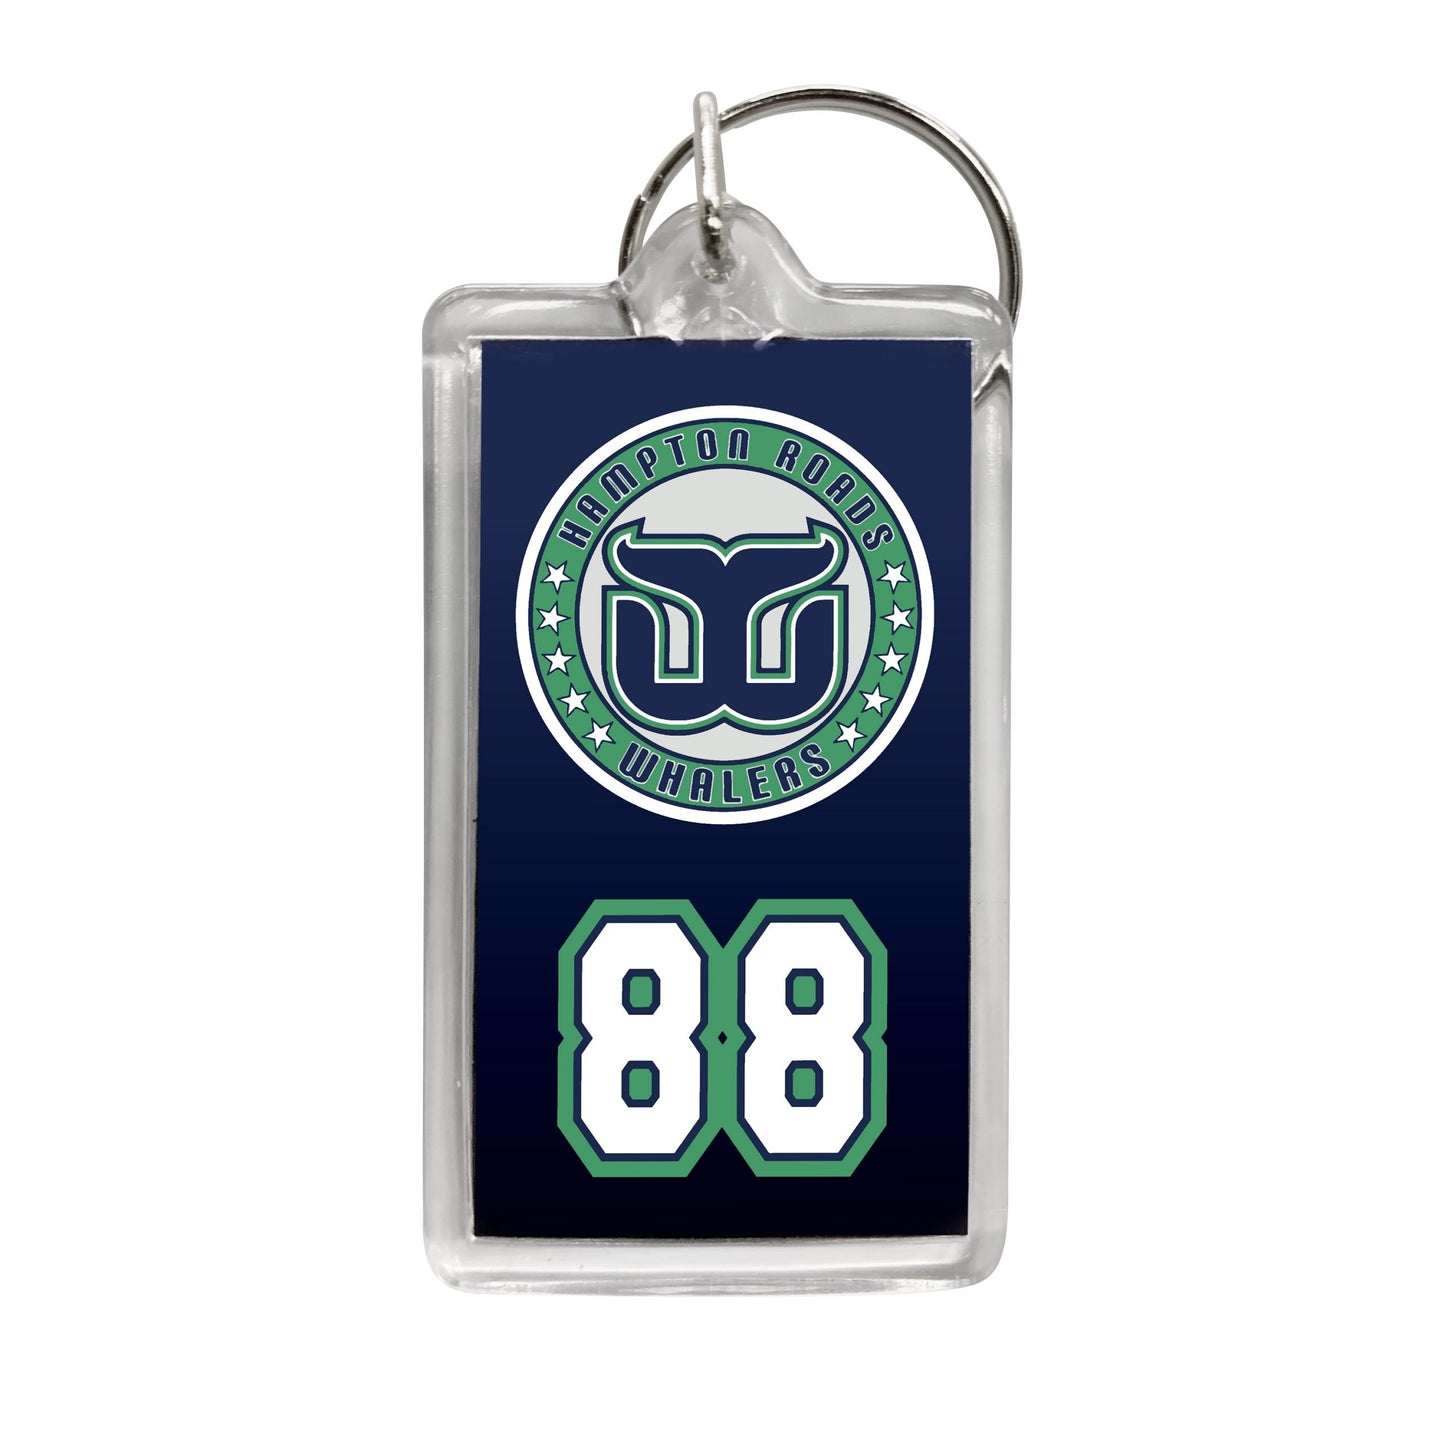 Personalized Hampton Roads Whalers number 88 keychain